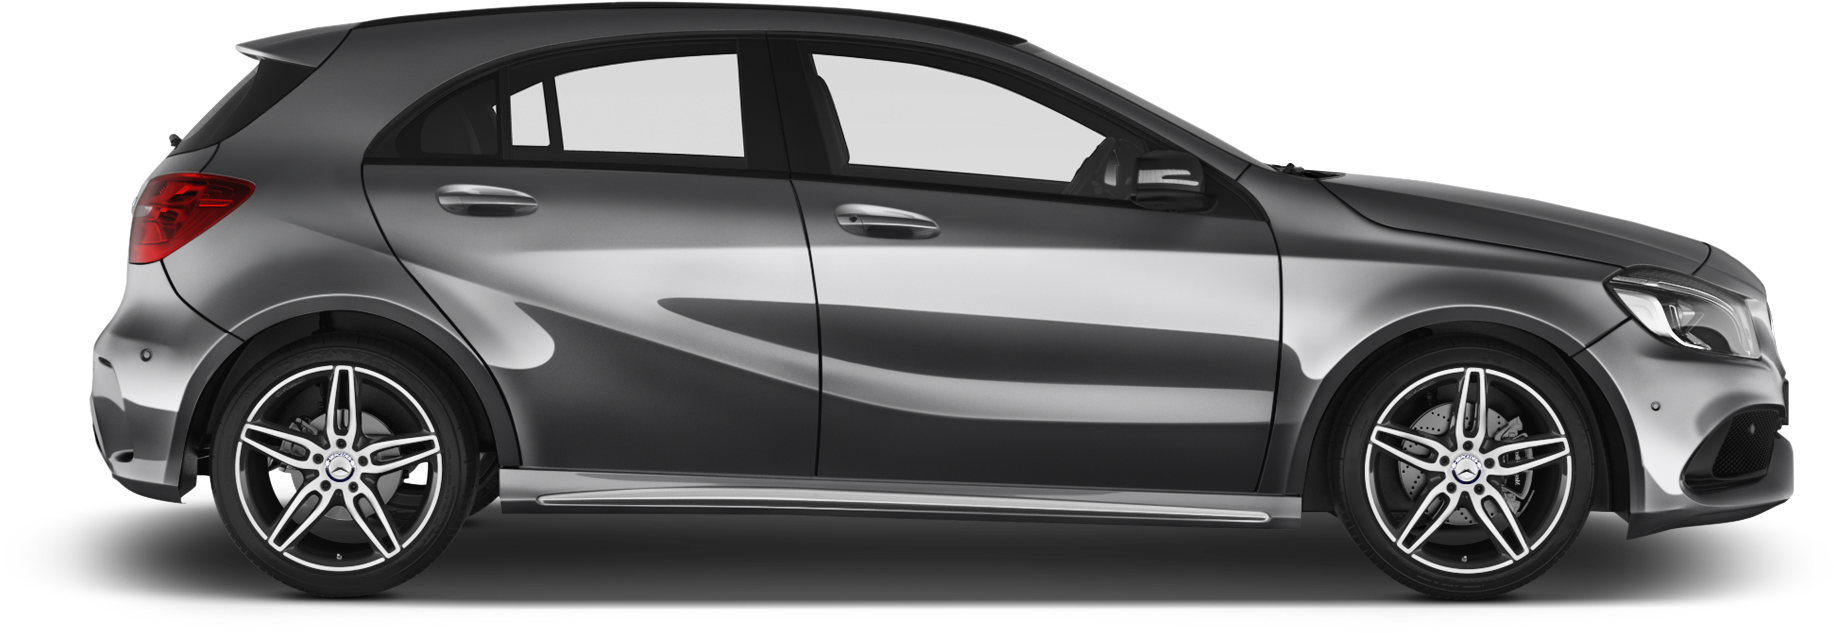 Mercedes Benz A Class Company Car Side View - Mercedes A Class Side View (2048x1360), Png Download